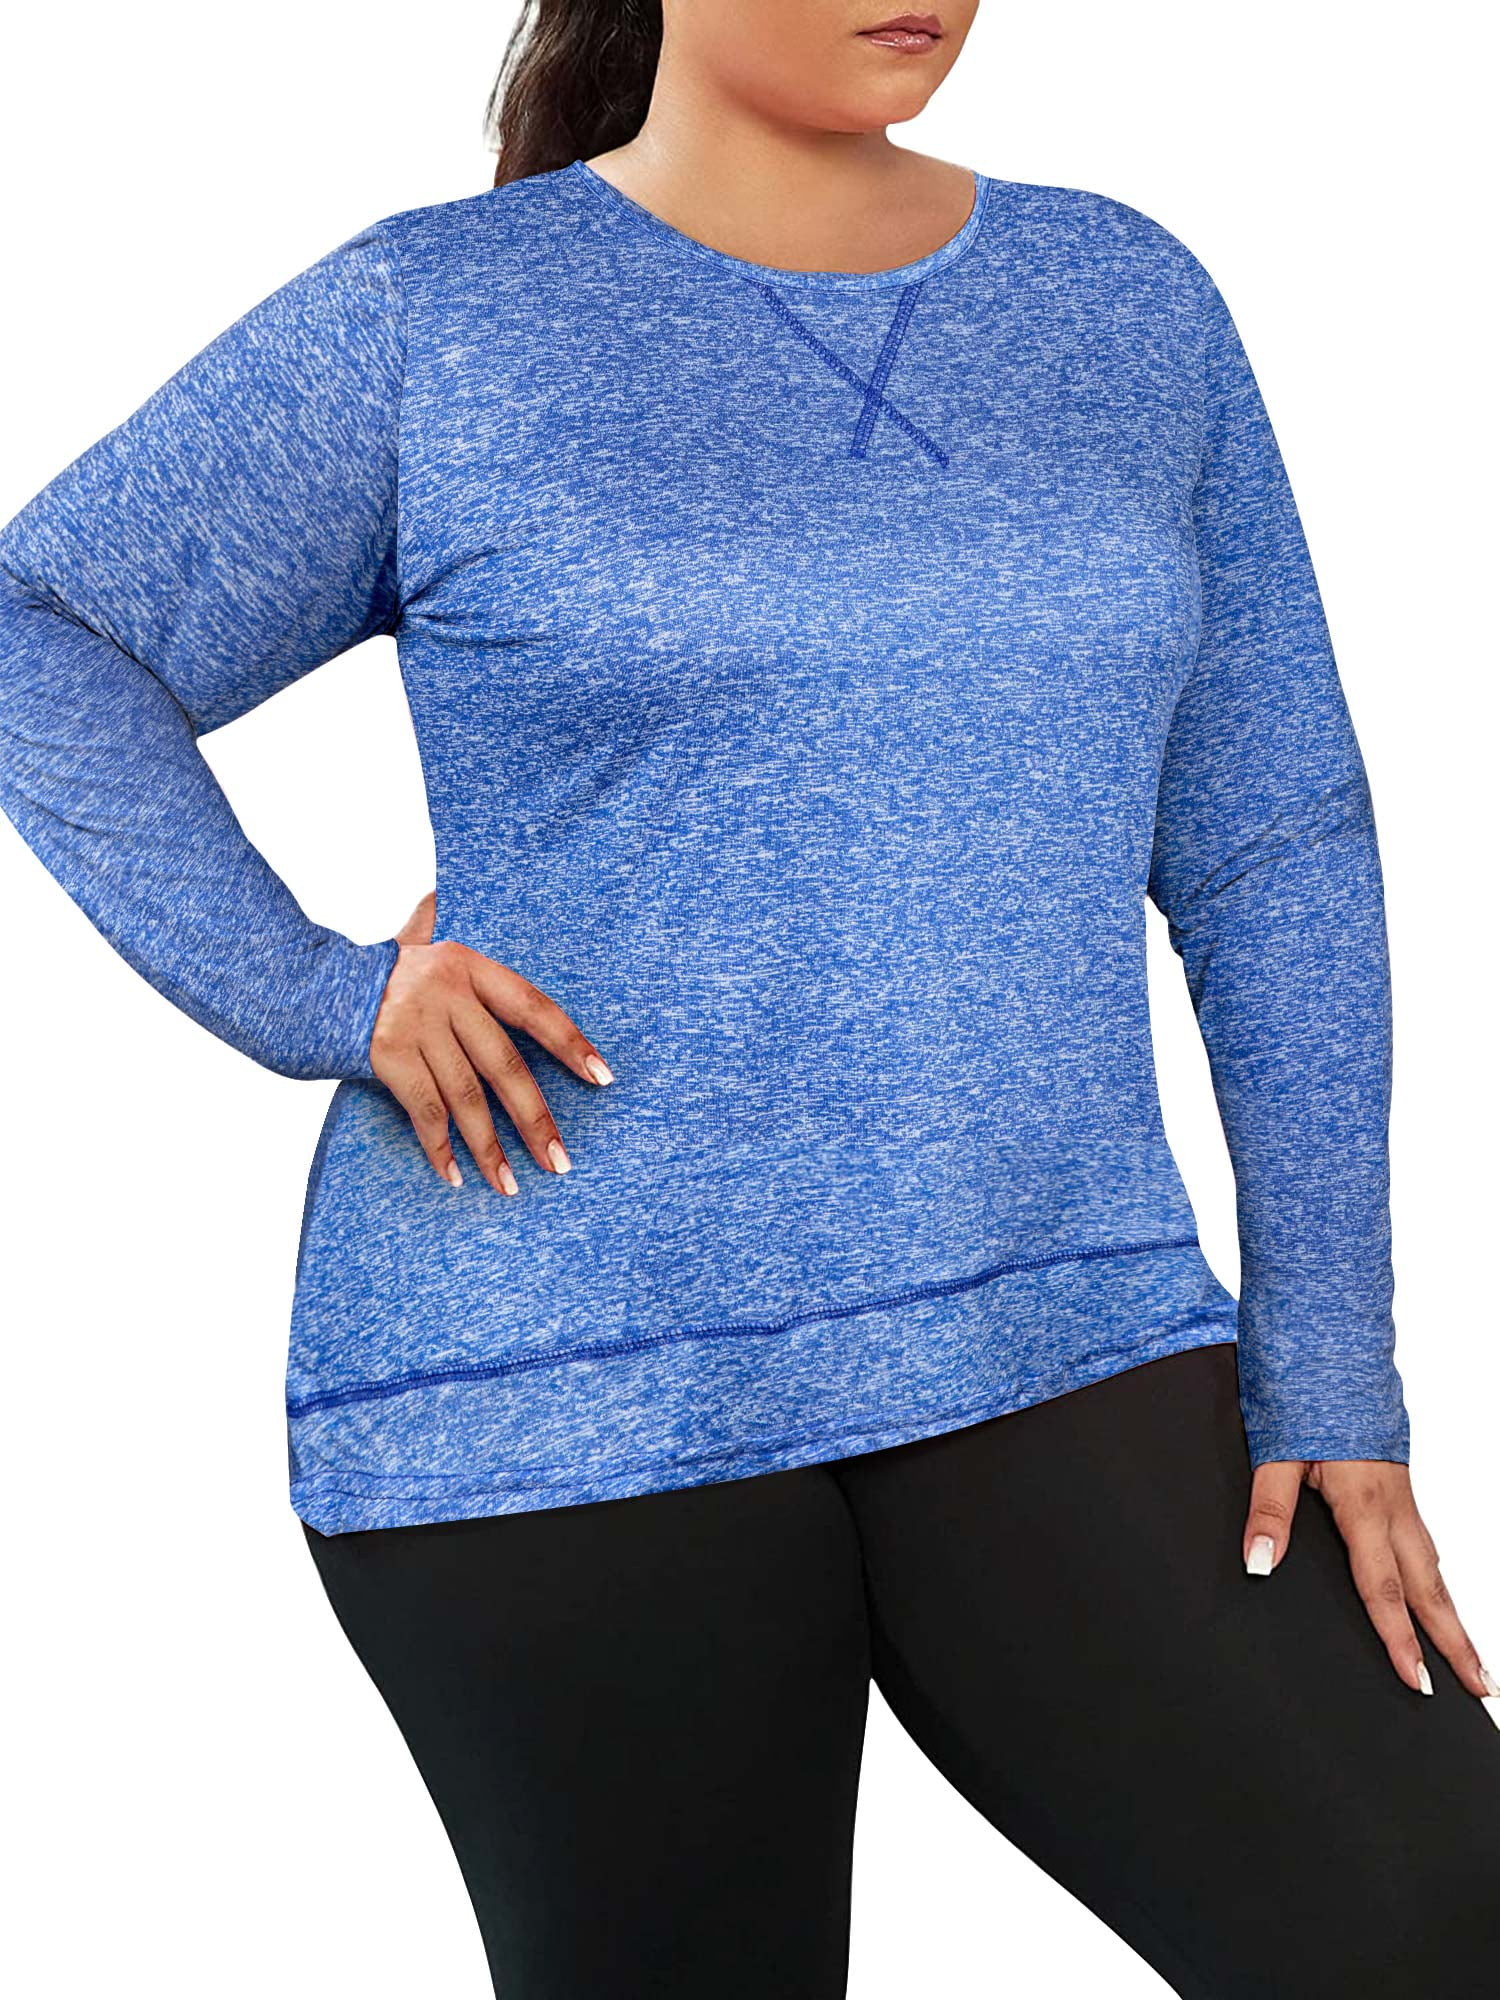 Womens Plus Size Long Sleeve Workout Tops Athletic Quick Dry